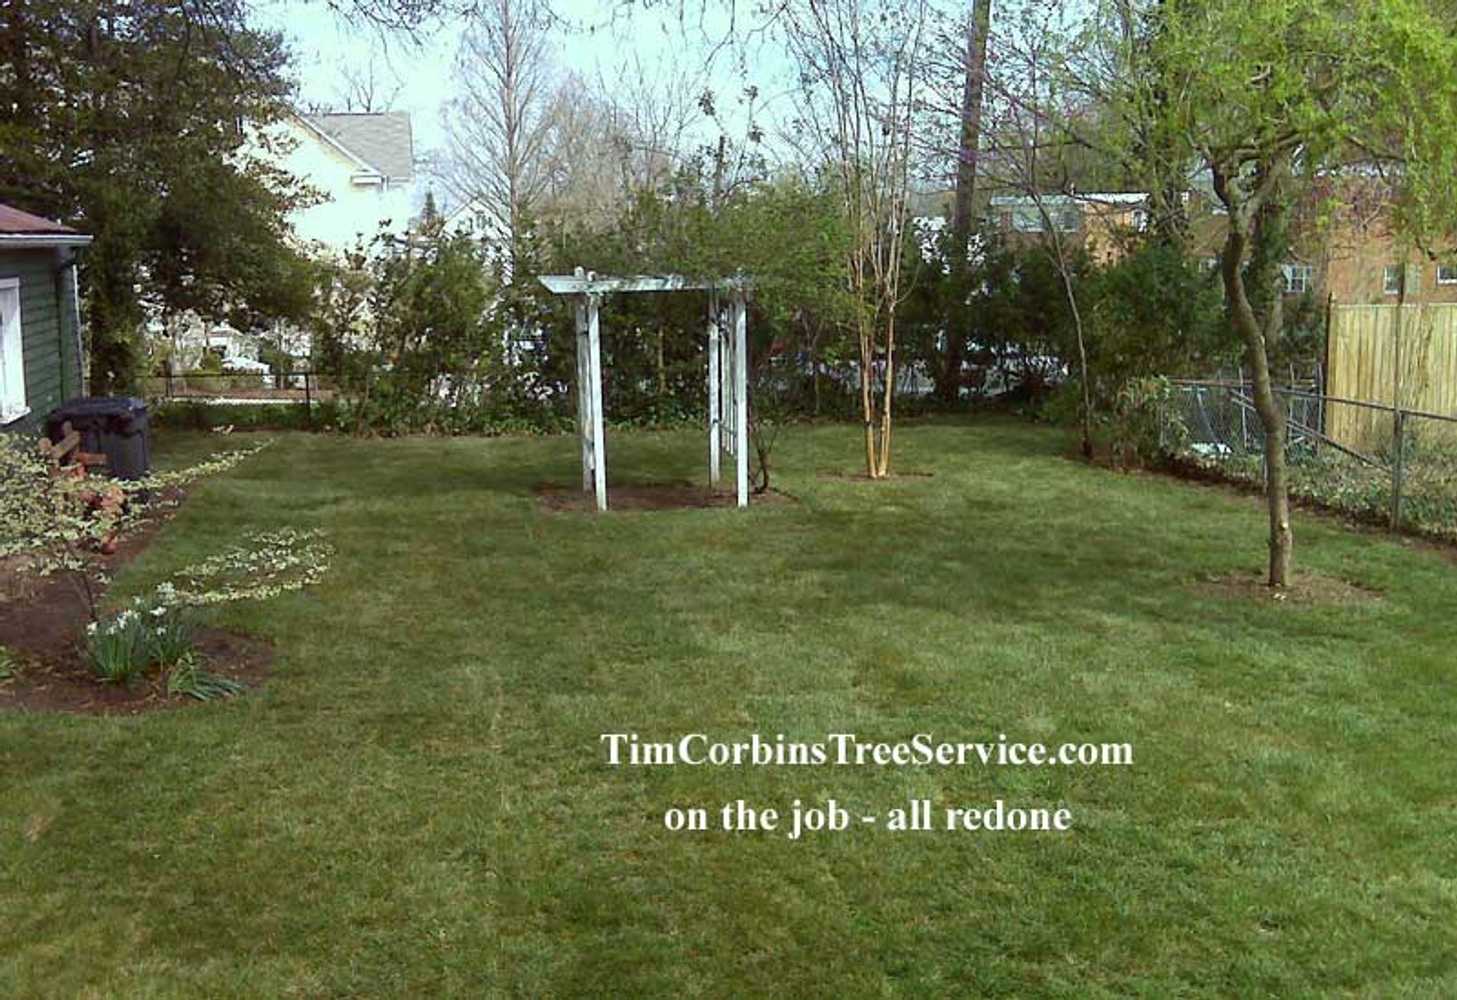 Project photos from Tim Corbin's Tree Service